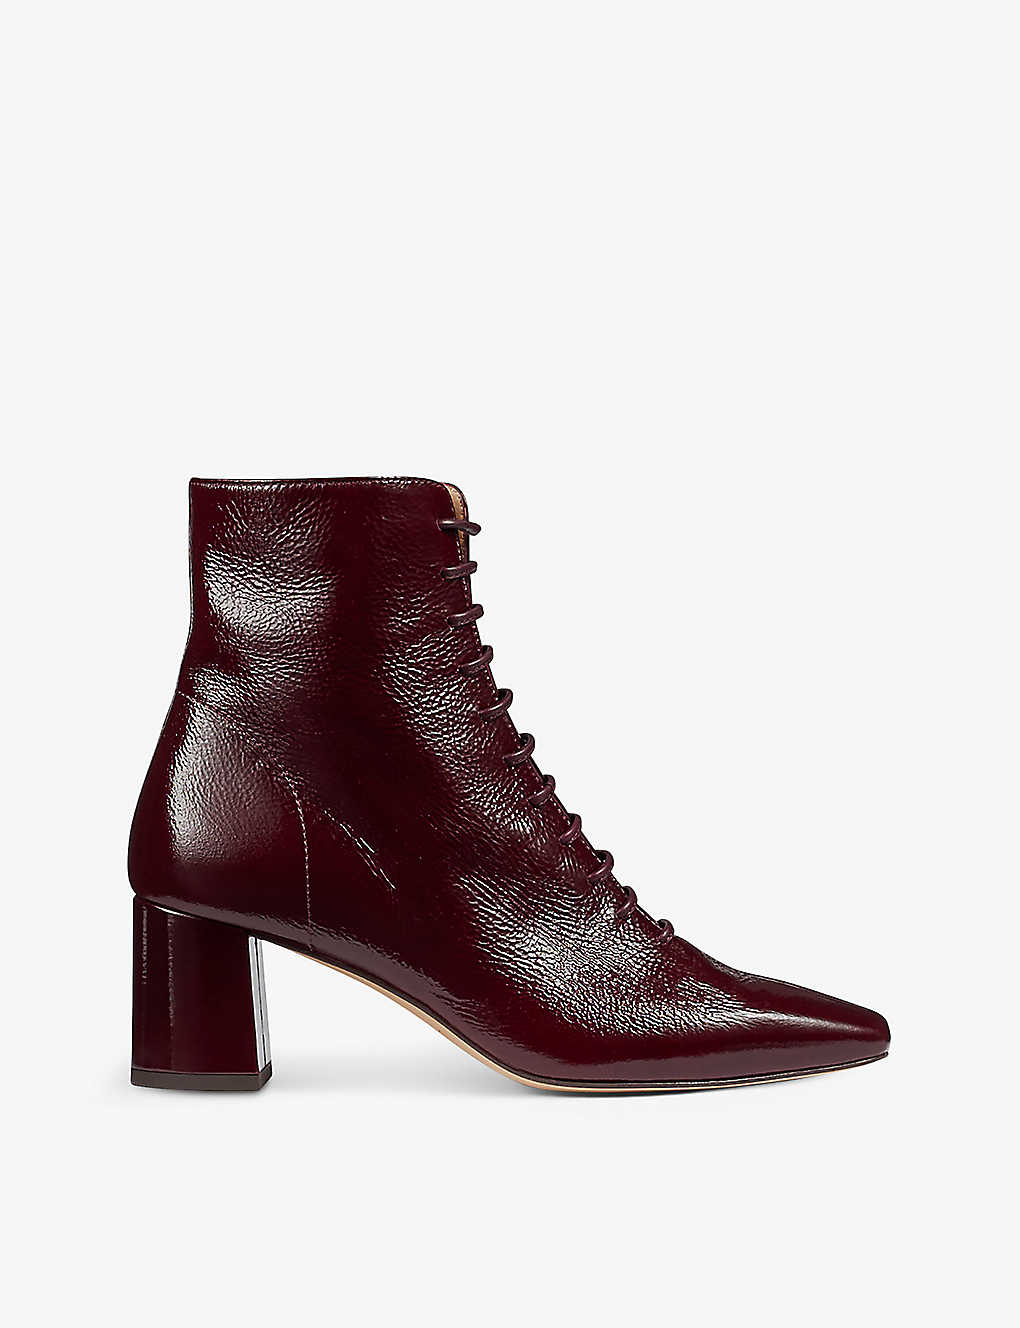 Lk Bennett Womens Red-garnet Arabella Square-toe Patent-leather Heeled Ankle Boots